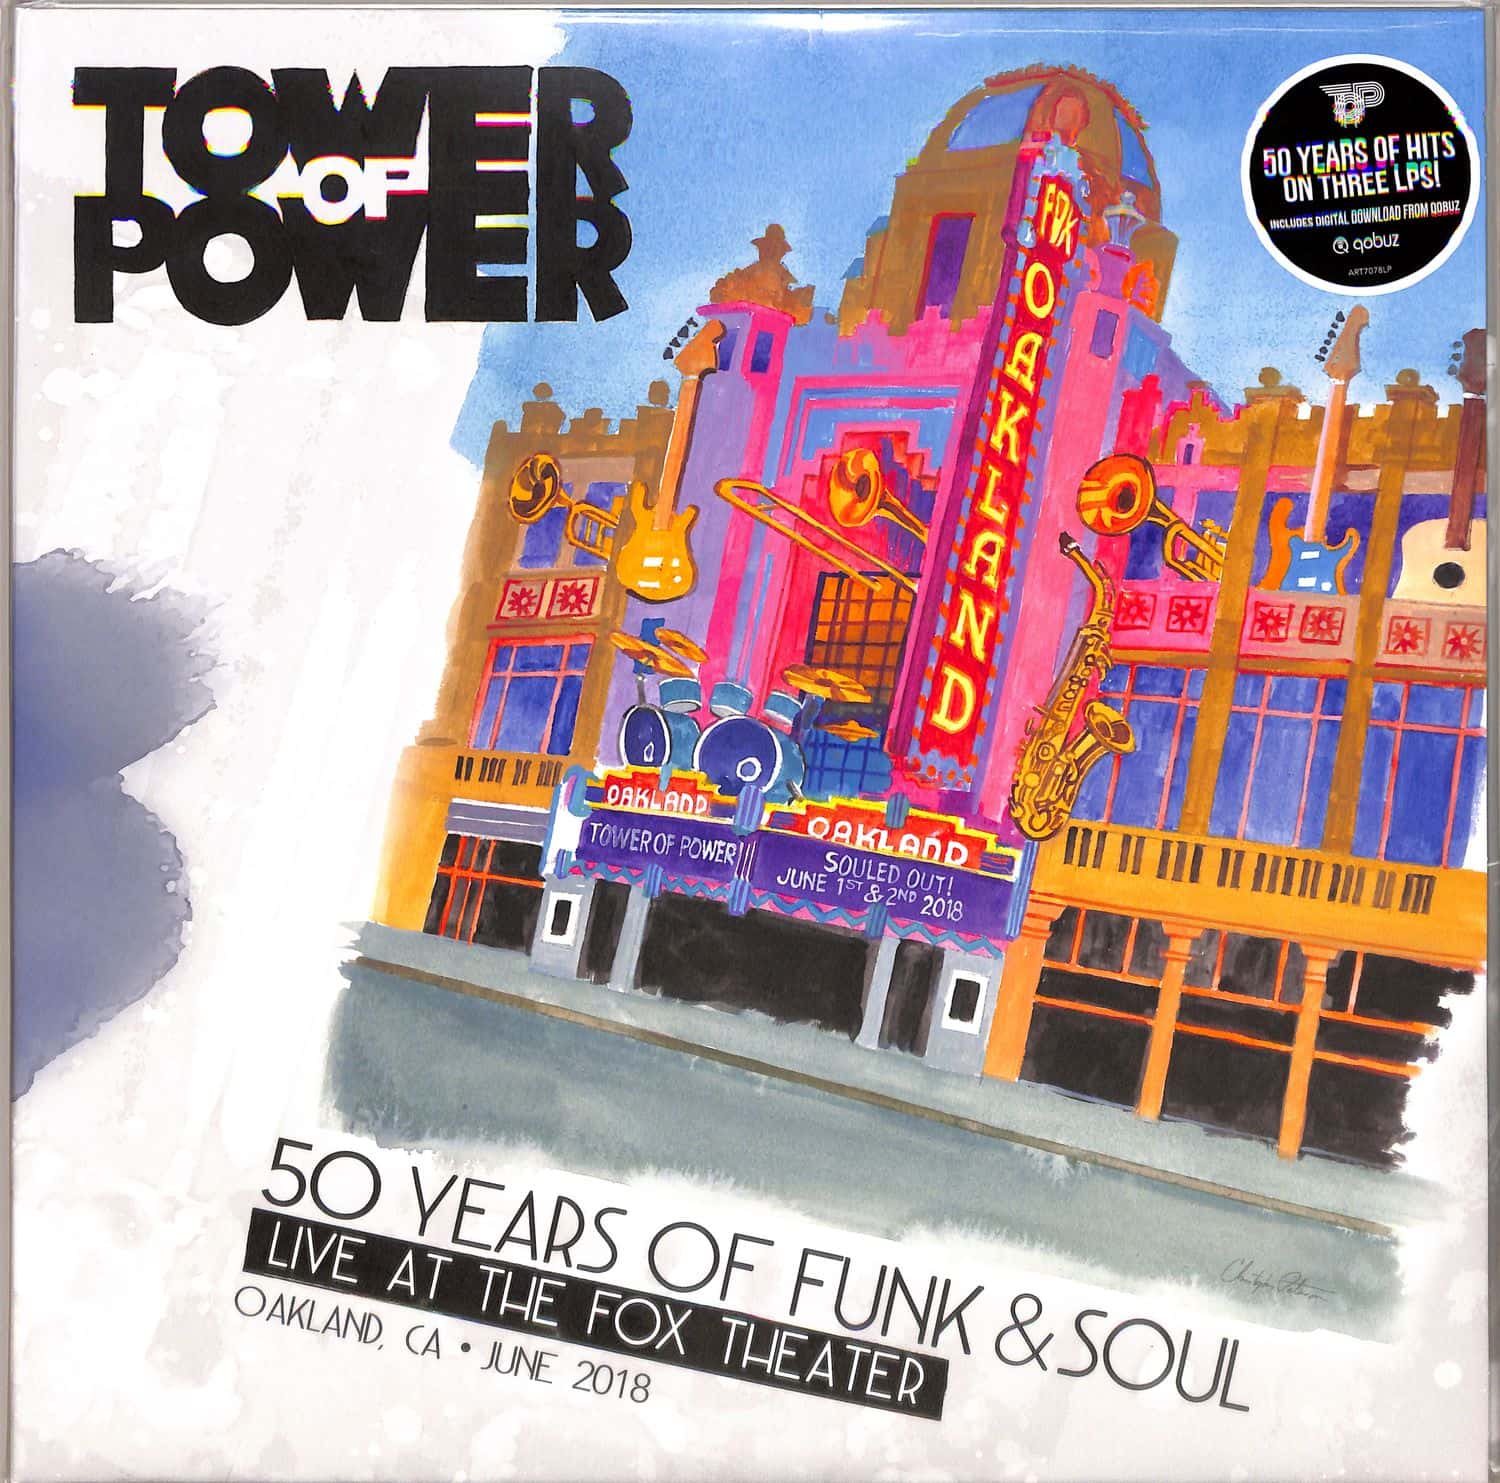 Tower Of Power - 50 YEARS OF FUNK & SOUL 